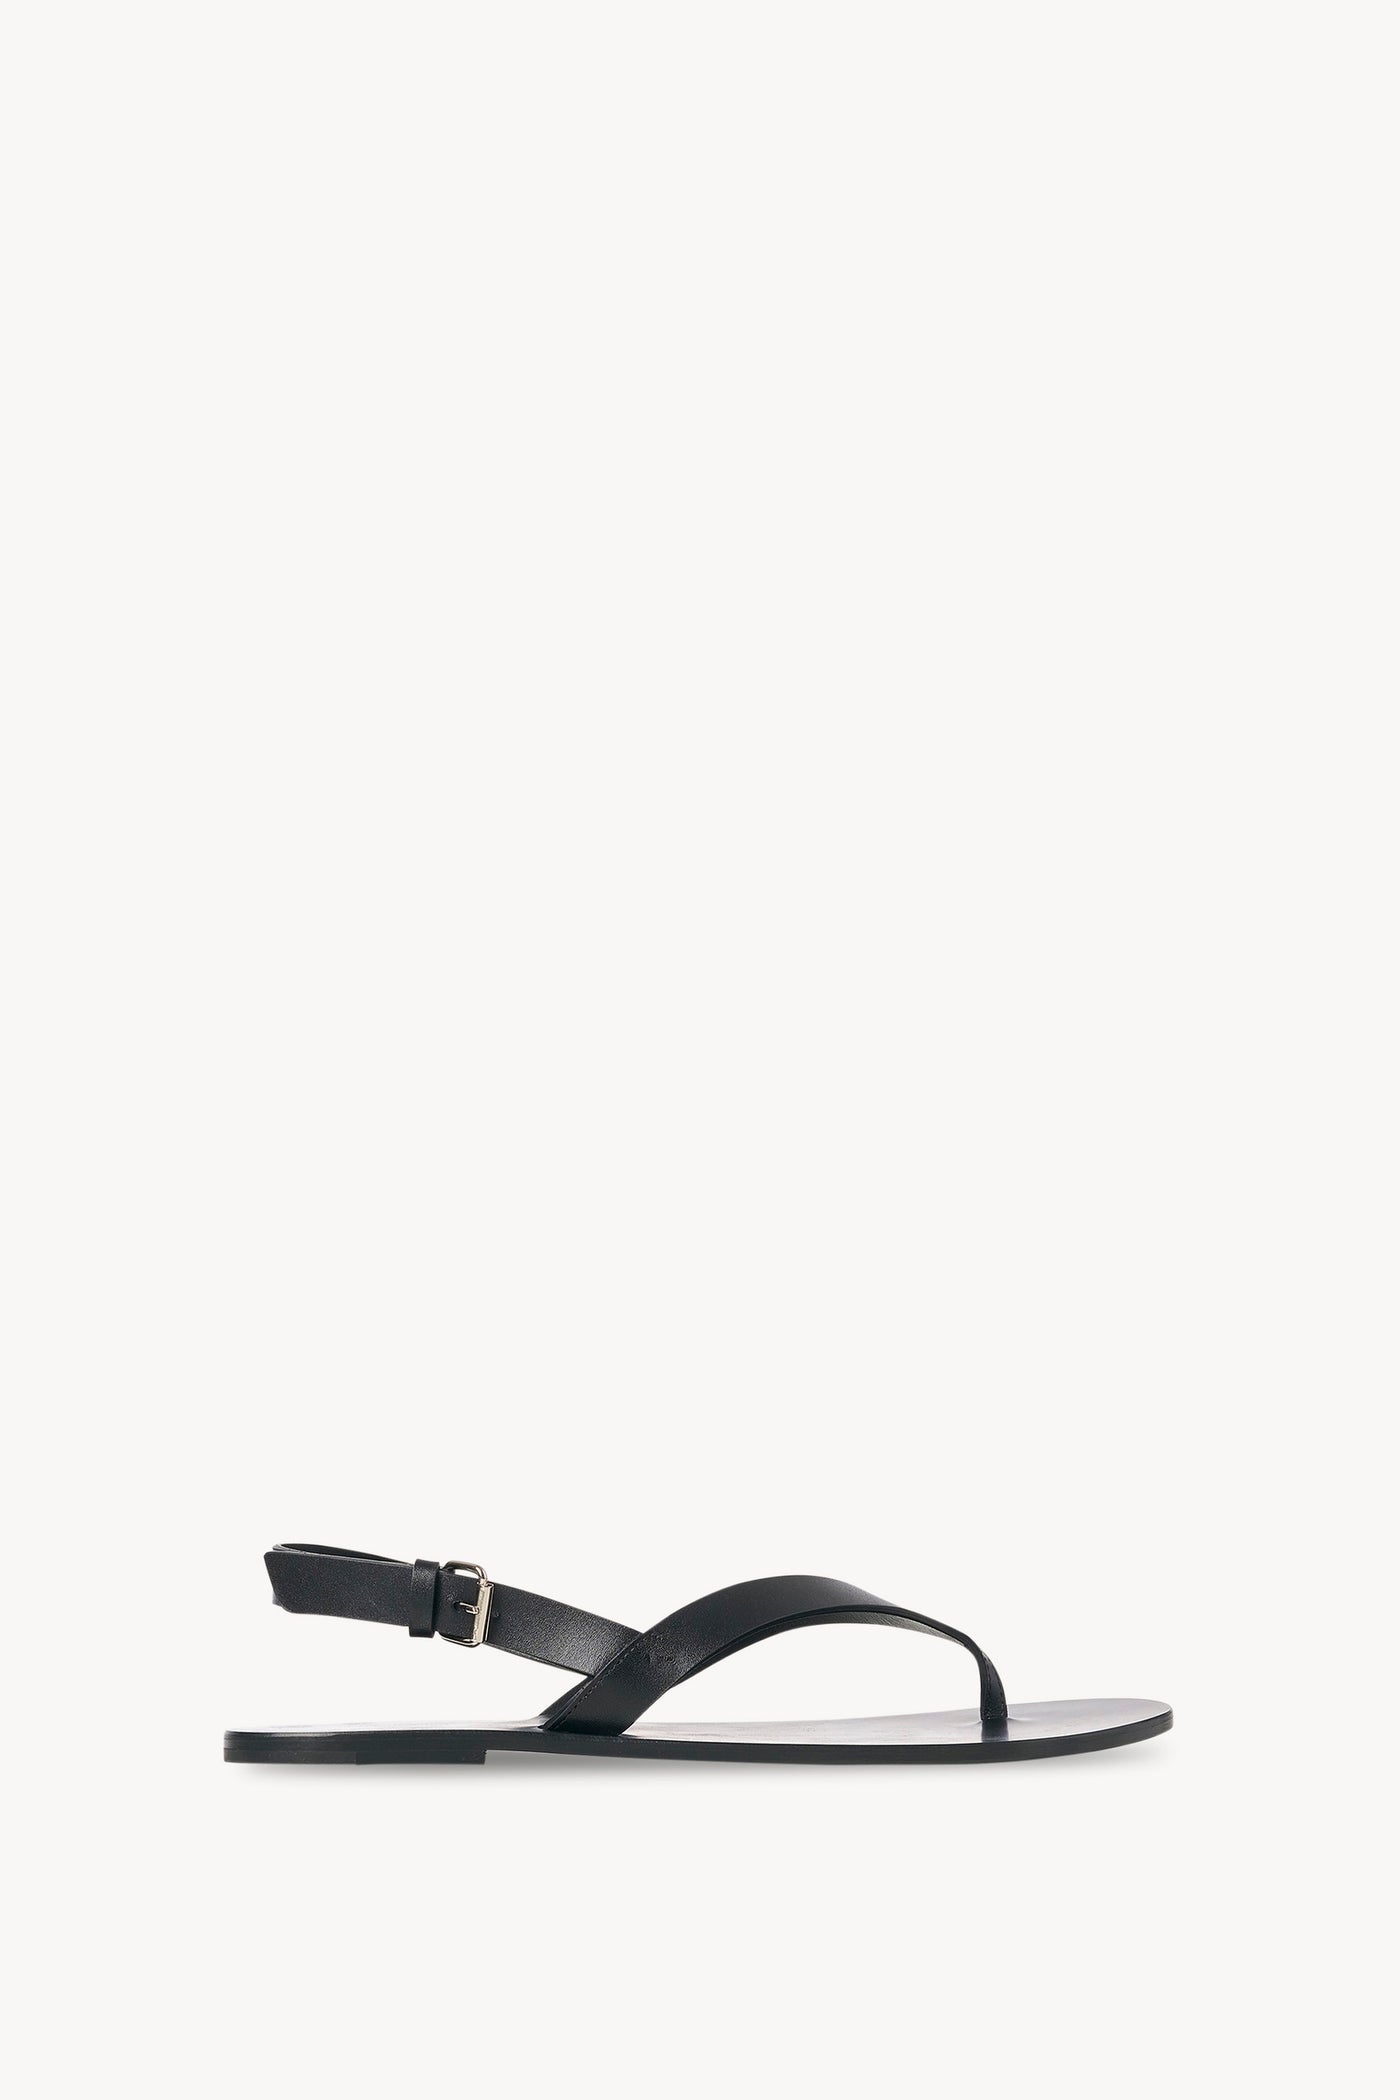 the-row-hiking-flip-flop-black-amarees